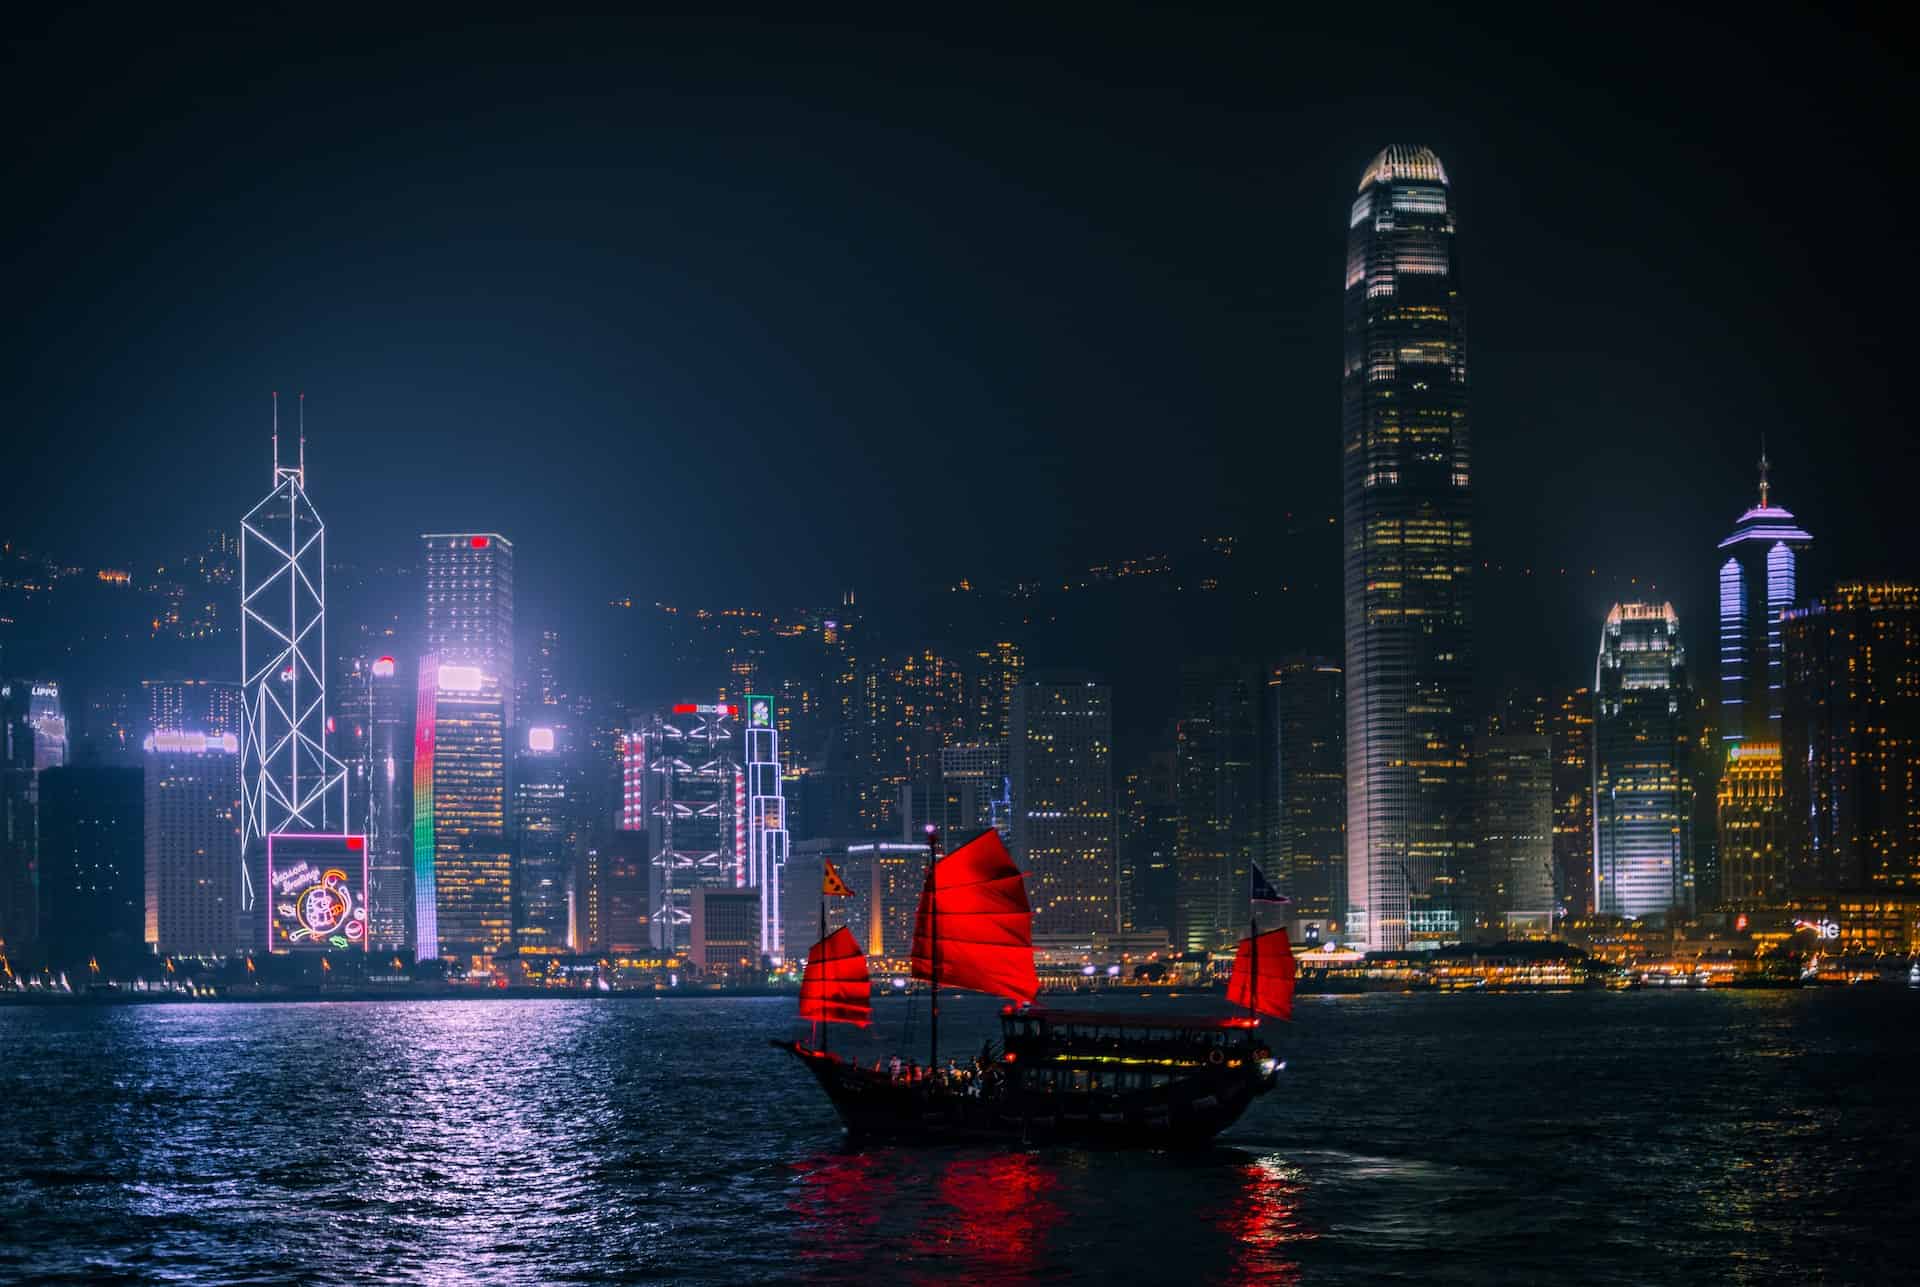 TRON Founder's Hong Kong Expansion Plan In Jeopardy?